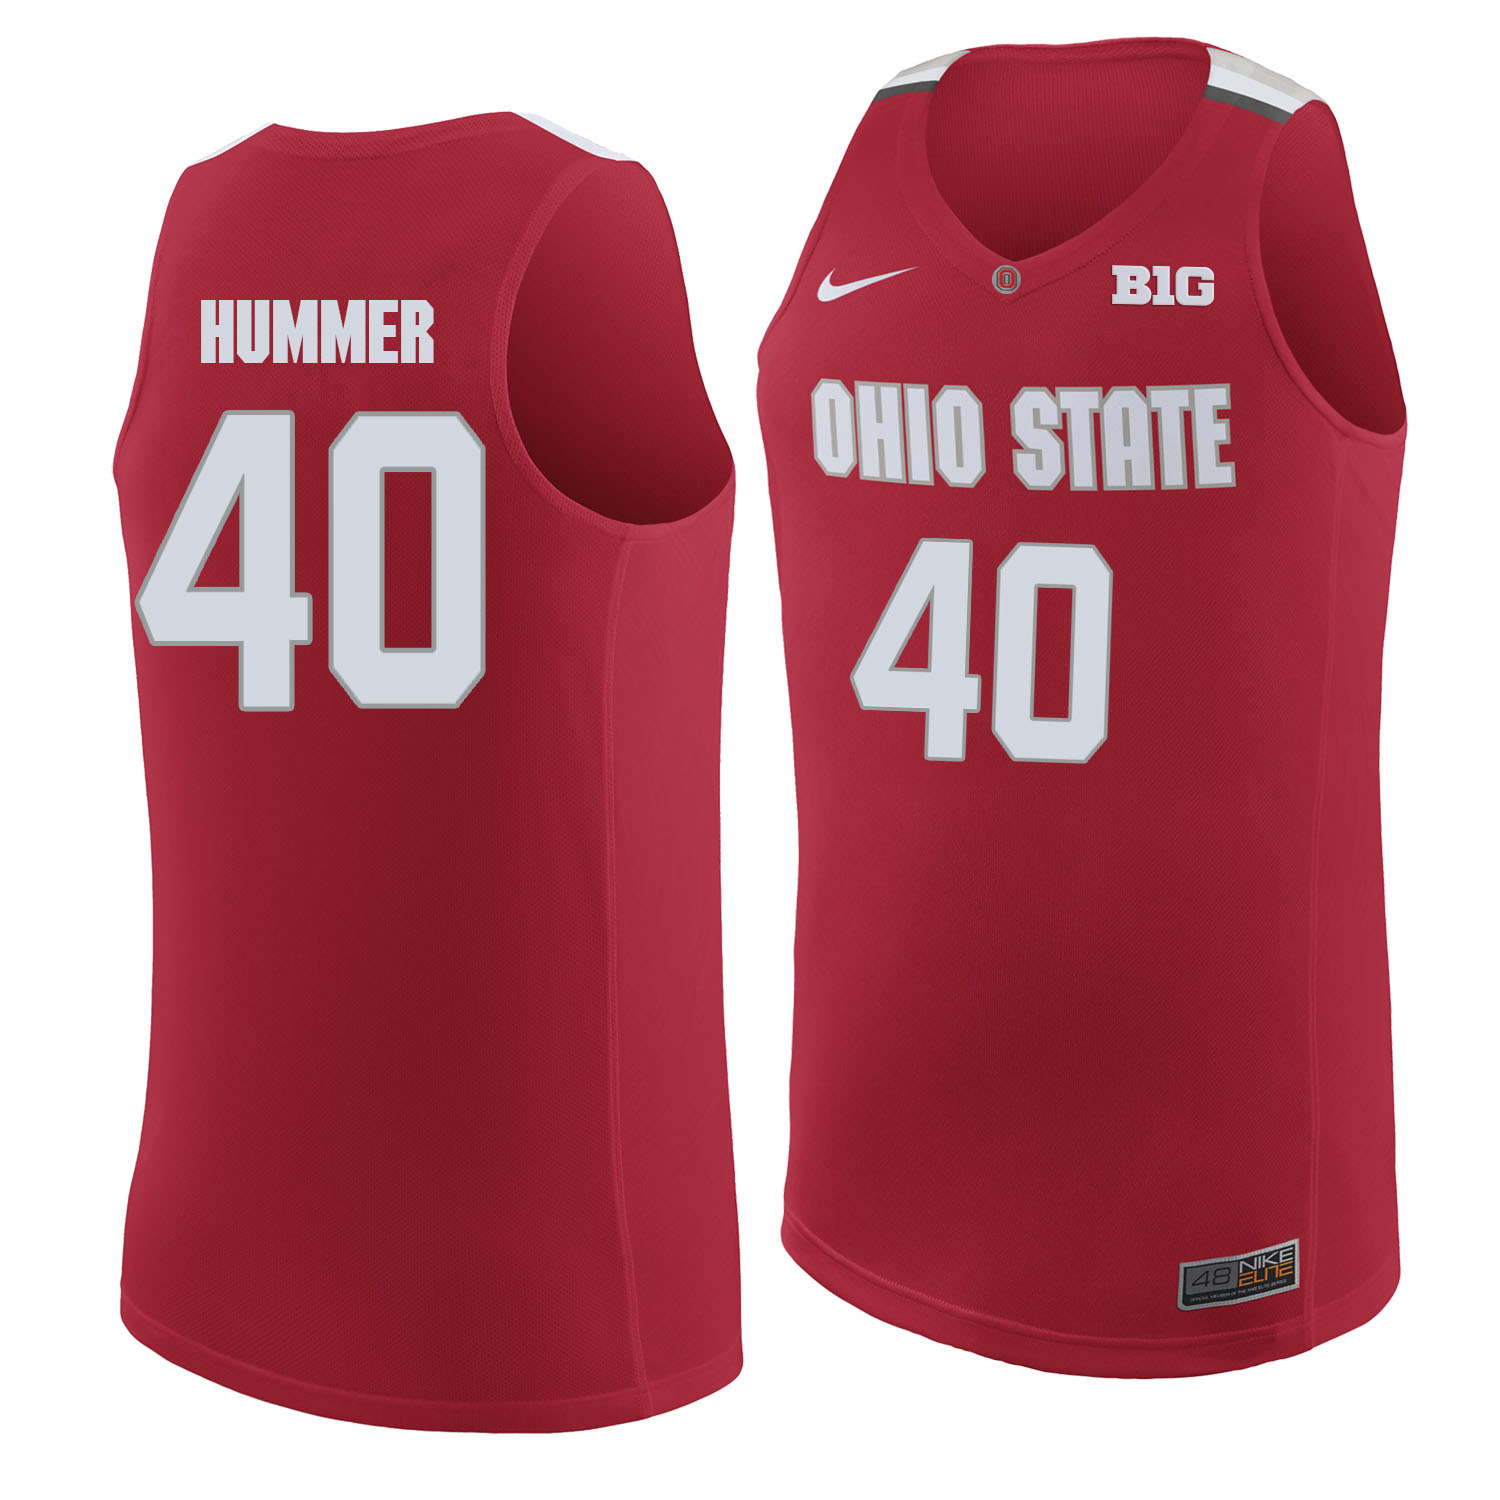 Ohio State Buckeyes 40 Danny Hummer Red College Basketball Jersey